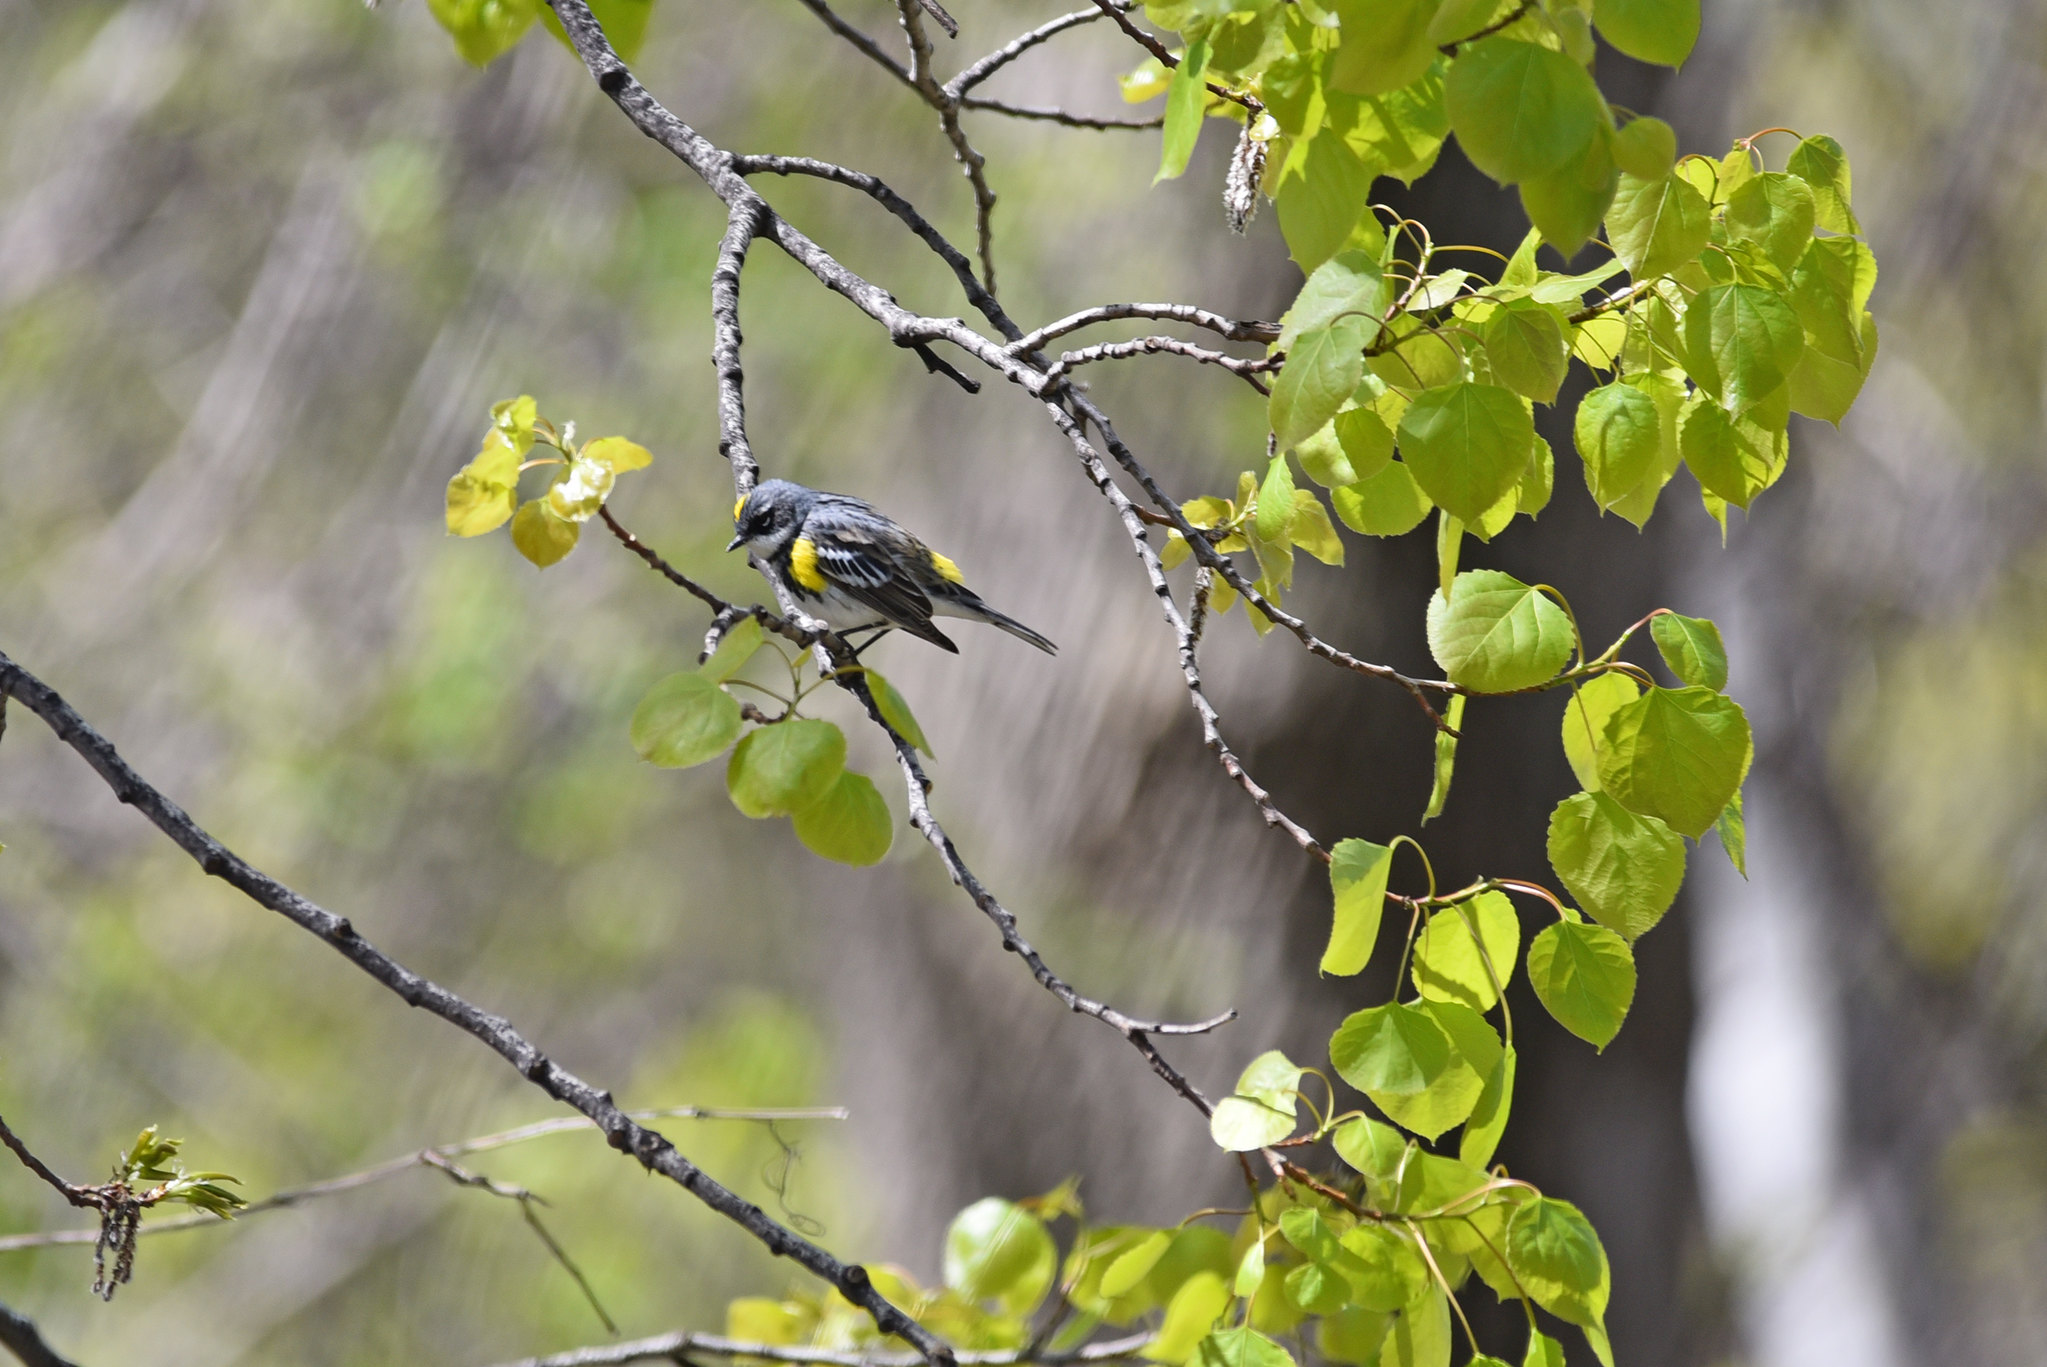 Yellow-rumped warbler perched in a tree